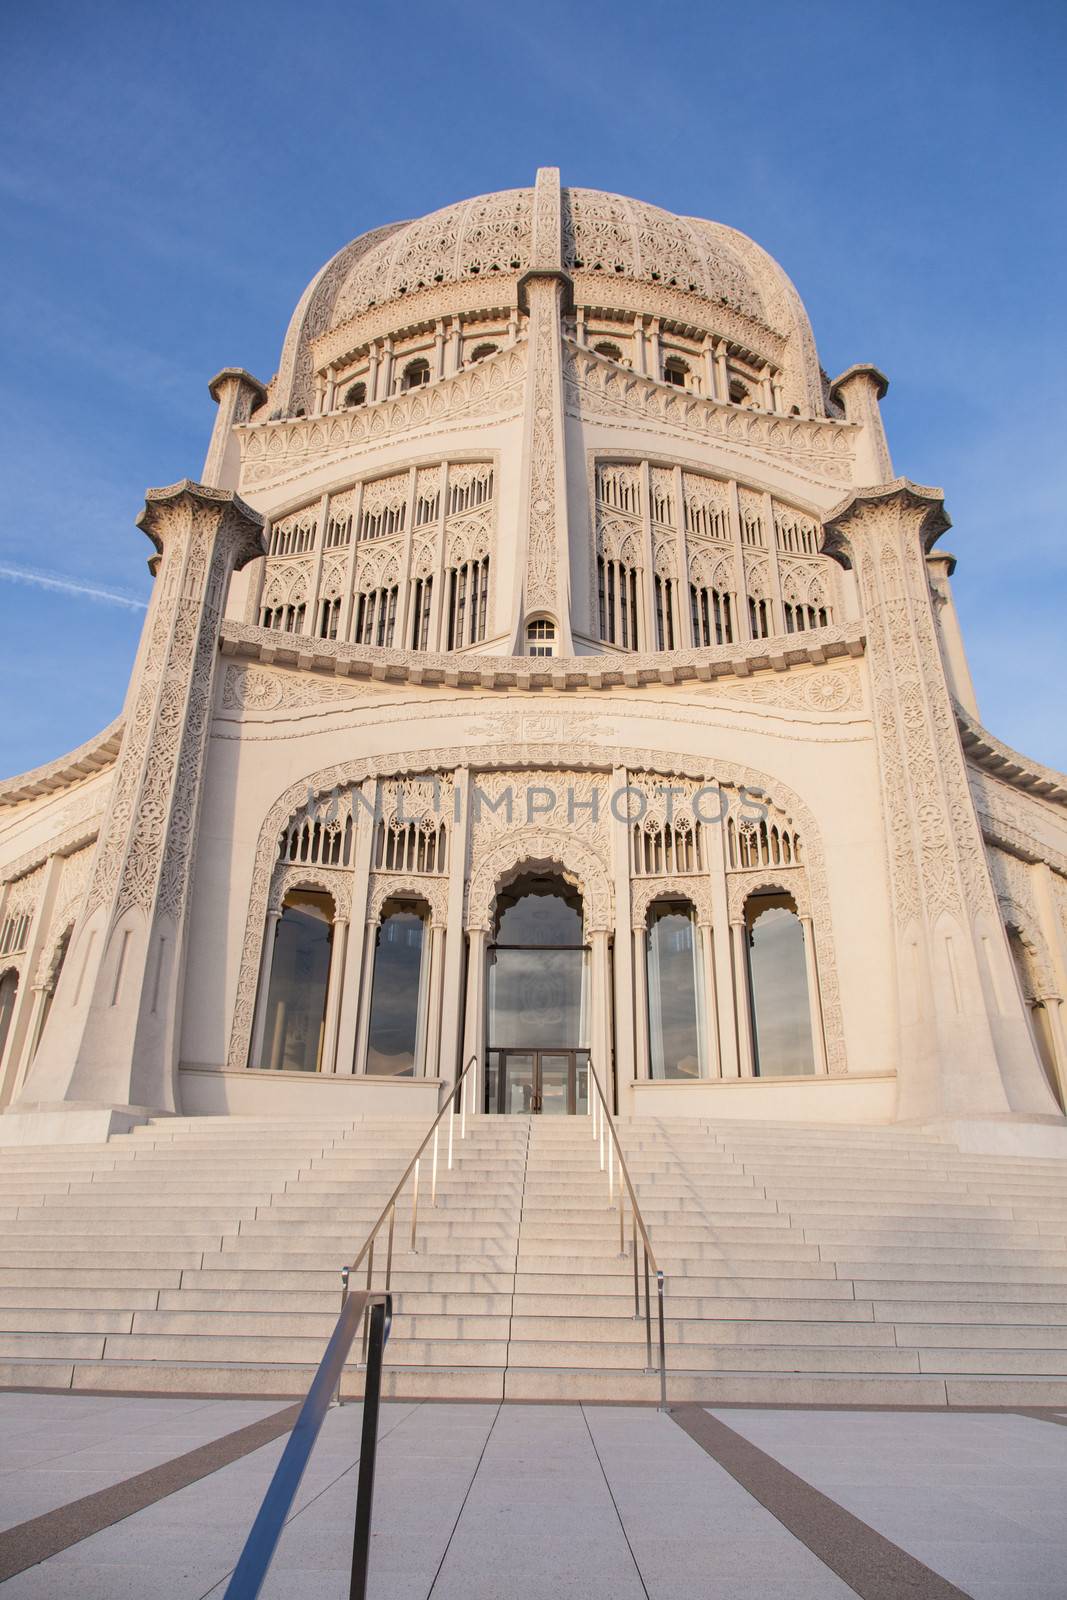 Bah��'�� Temple in Wilmette, Illinois, is the oldest surviving Bah��'�� House of Worship in the world.